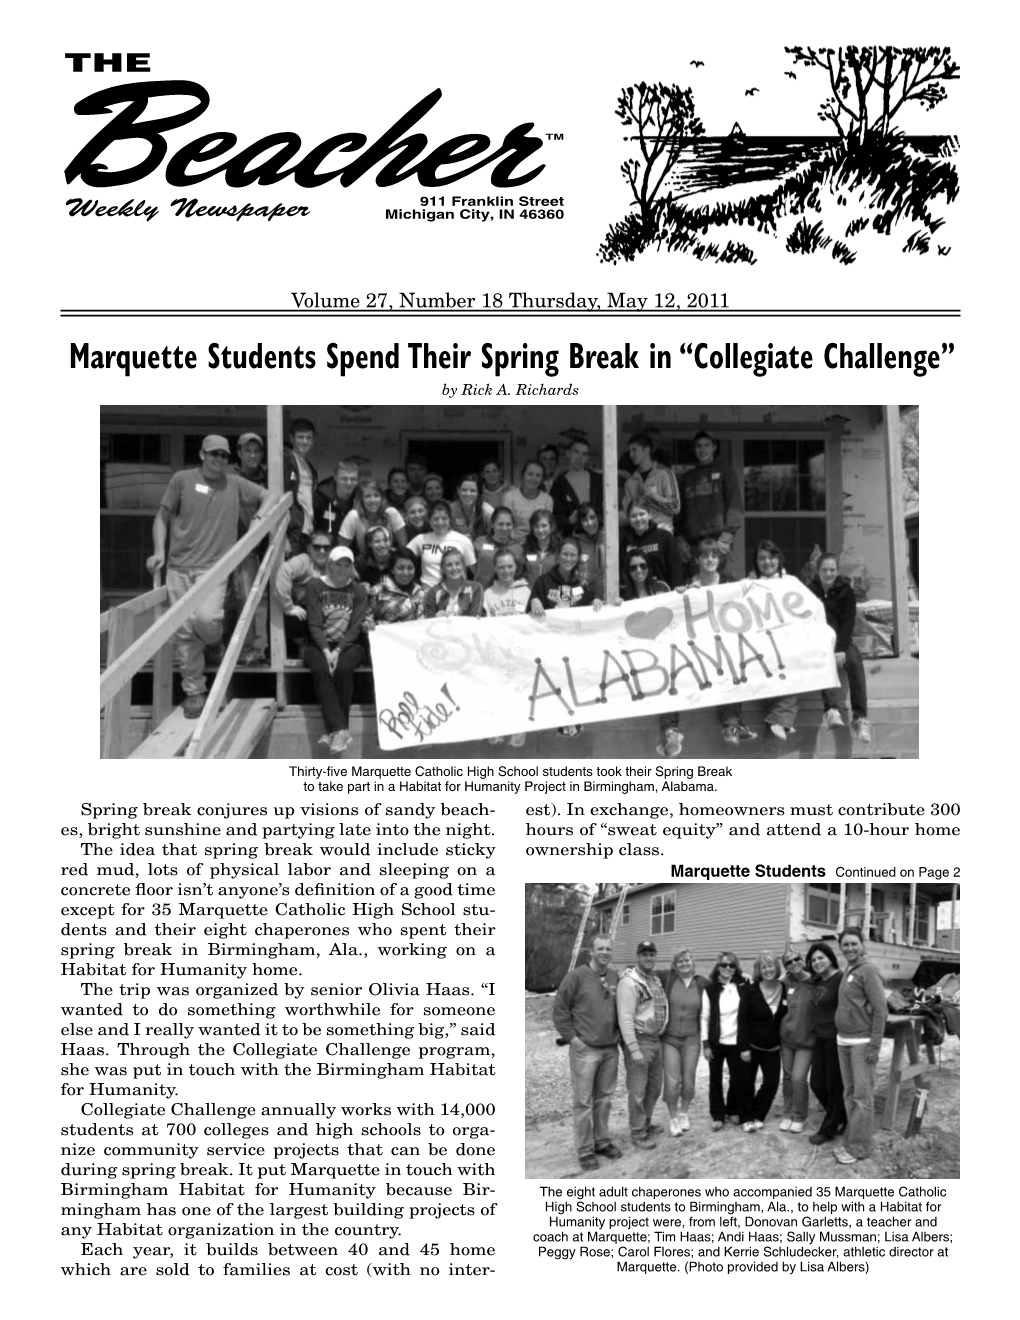 Marquette Students Spend Their Spring Break in “Collegiate Challenge” by Rick A